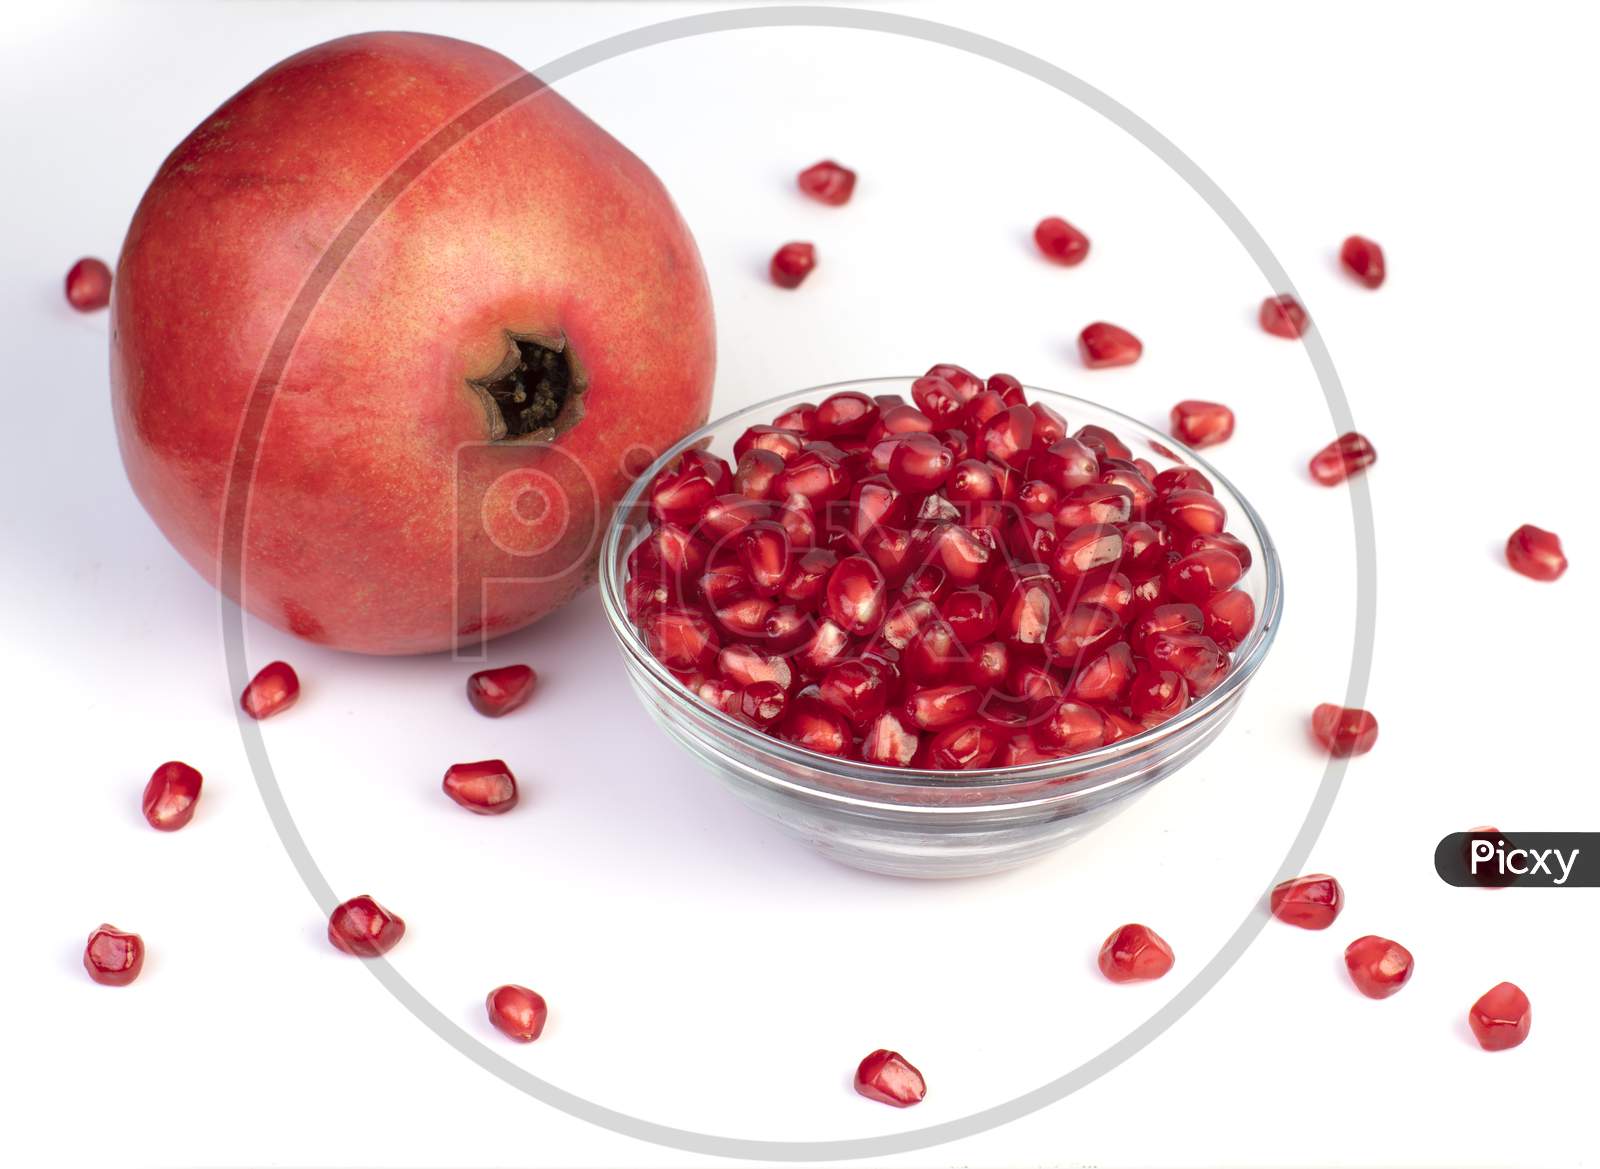 Bowl Of Pomegranate Seed Along With A Pomegranate Fruit